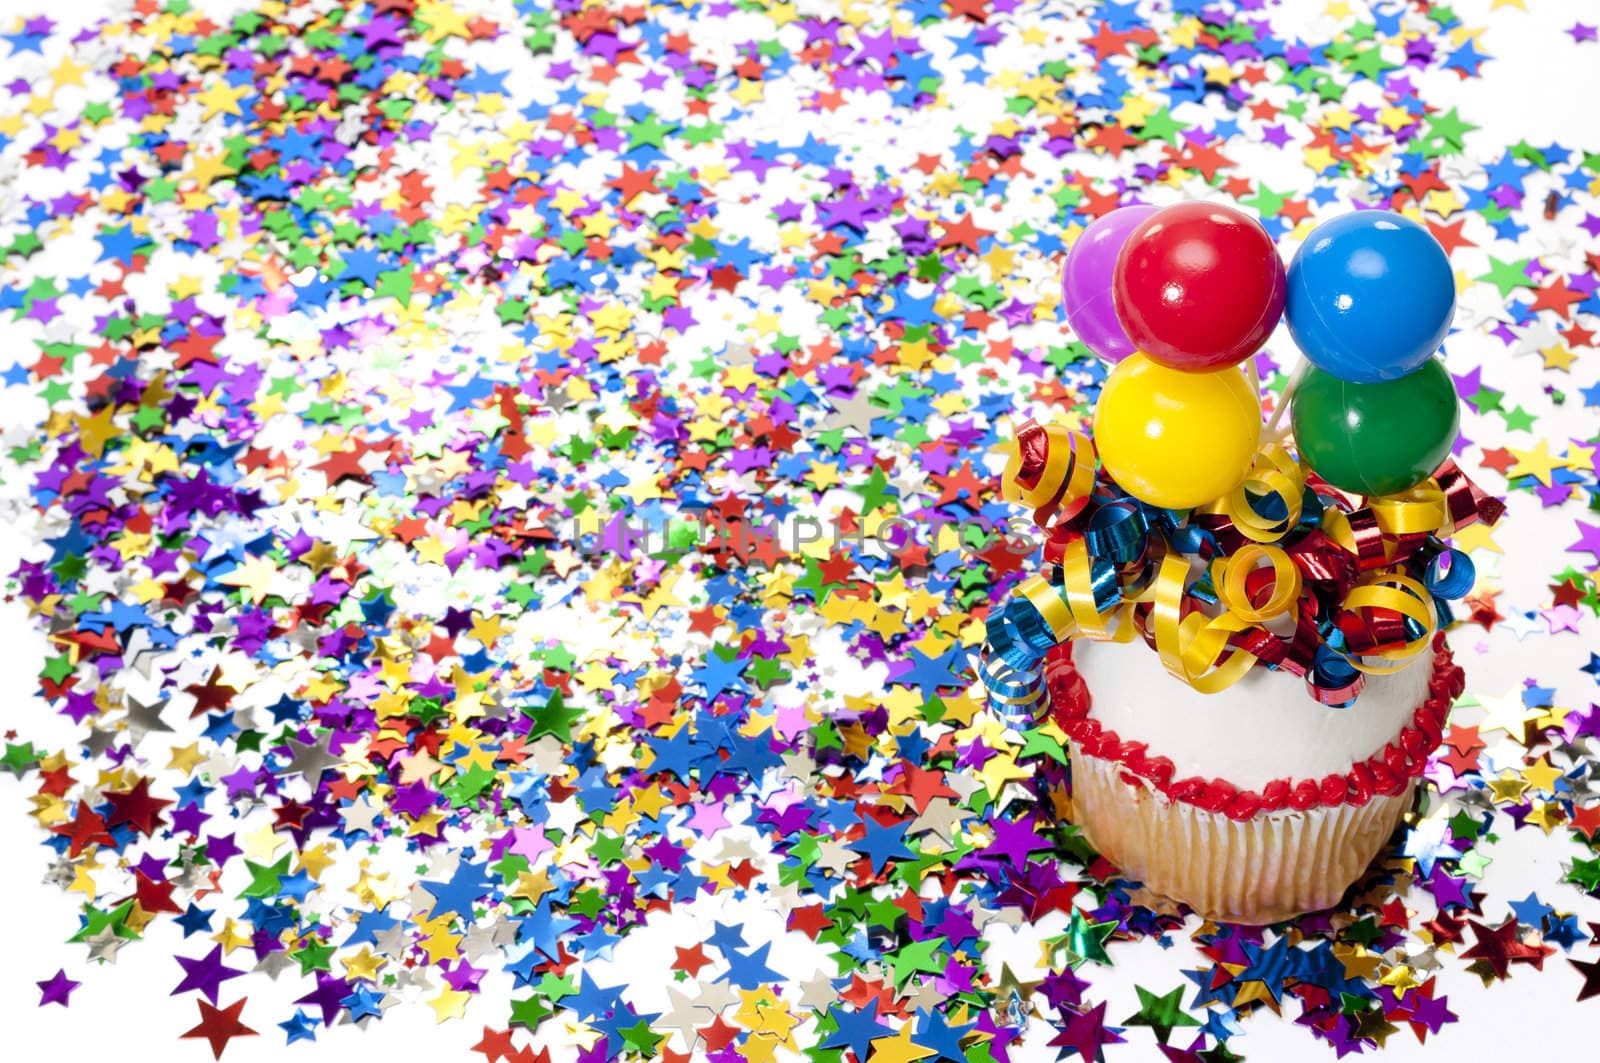 Cupcake and Confetti at Party by dehooks